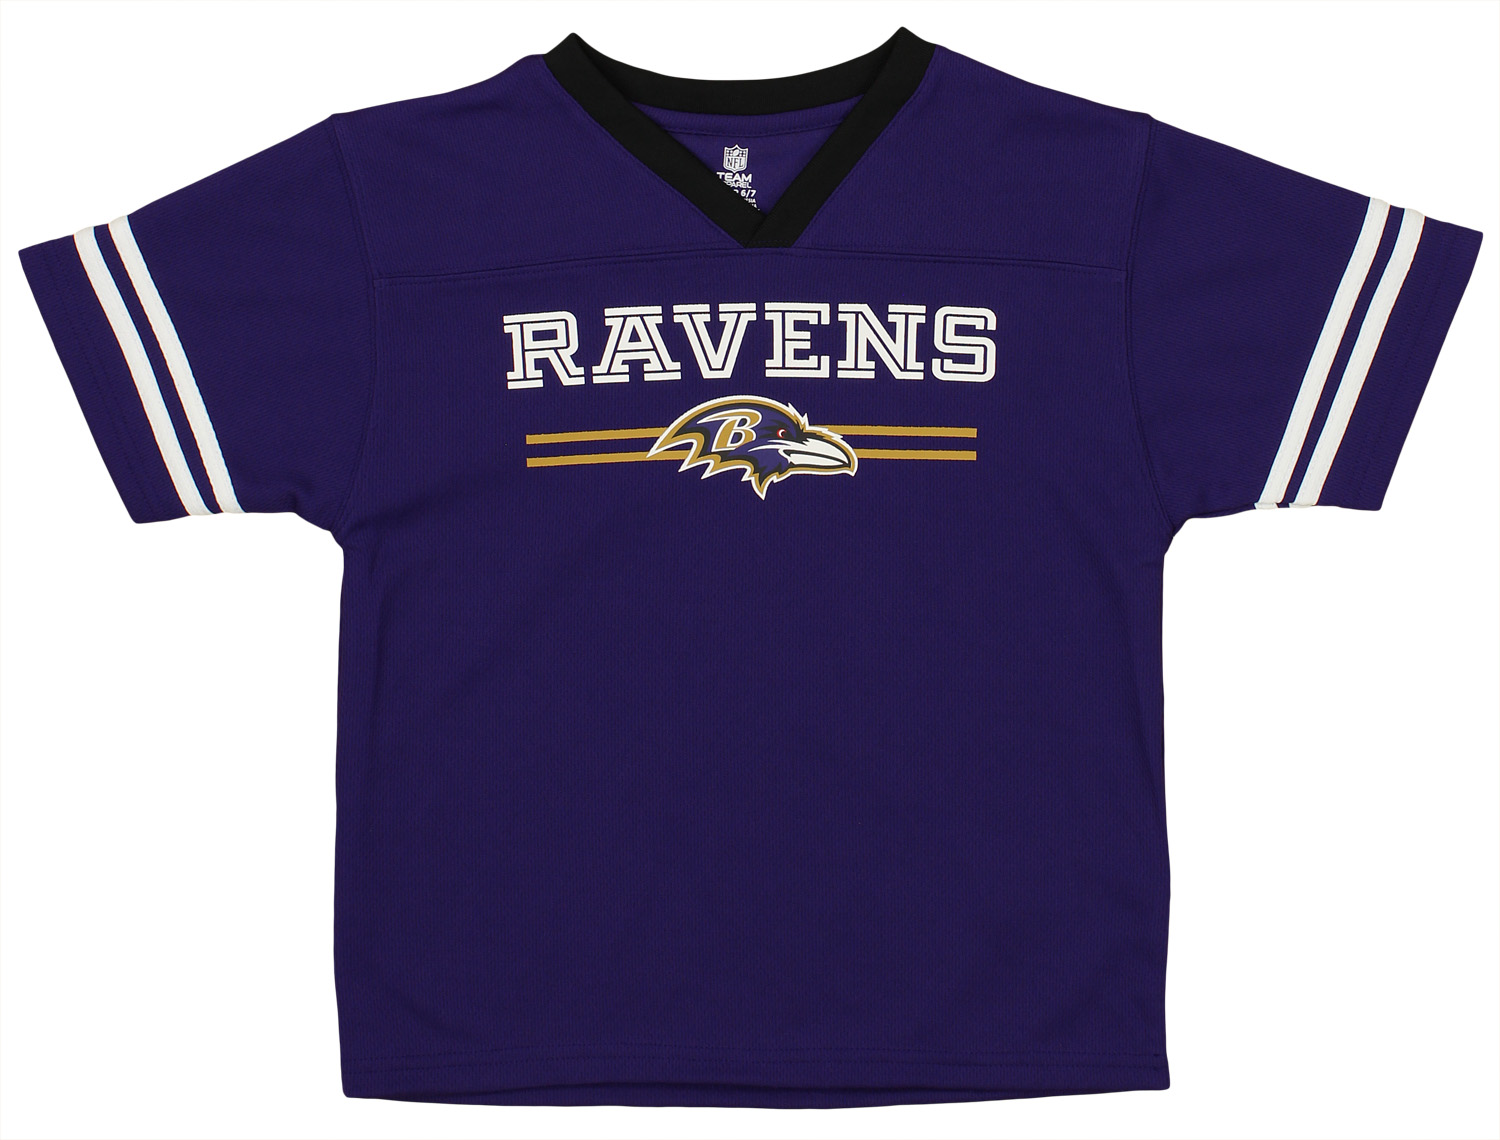 OuterStuff NFL Youth Boys Team Color Mesh Jersey, Baltimore Ravens | eBay